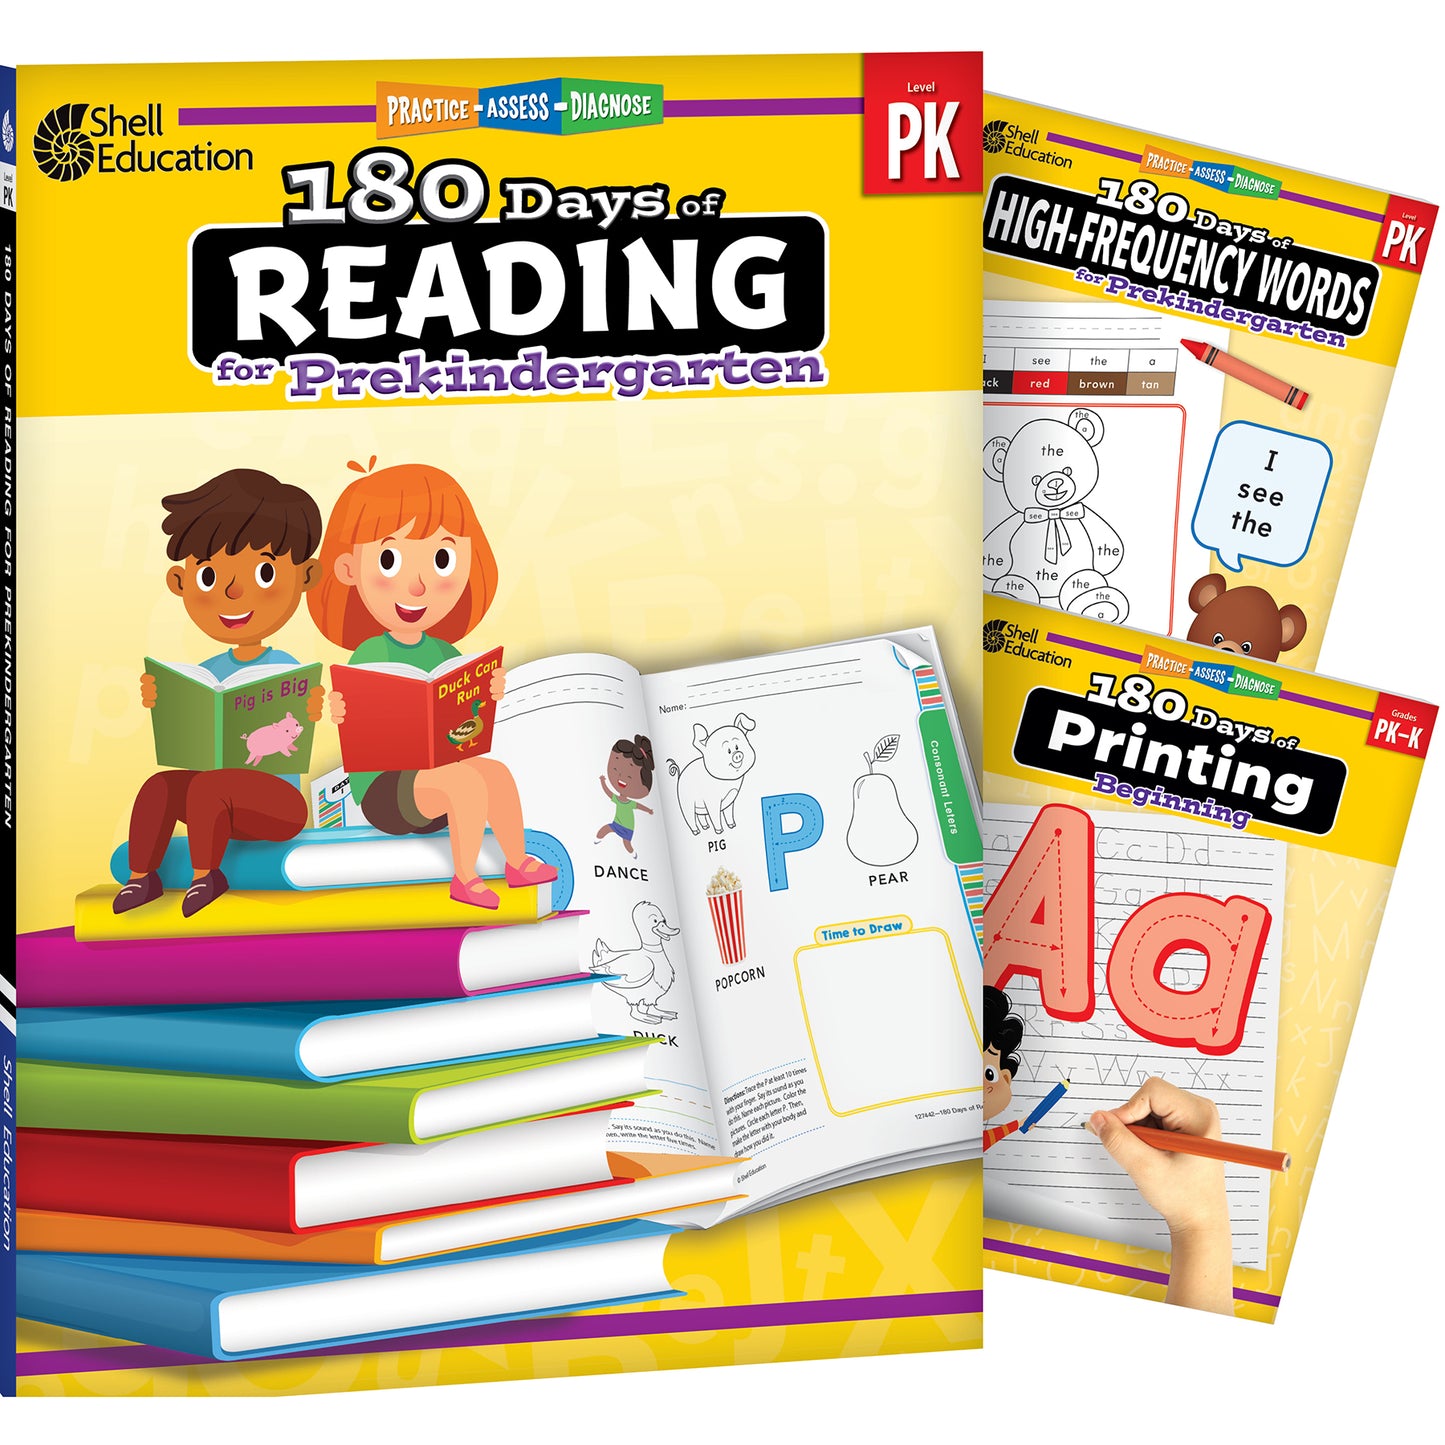 180 Days Books: Reading, High-Frequency Words, & Printing PK - Set of 3 Books